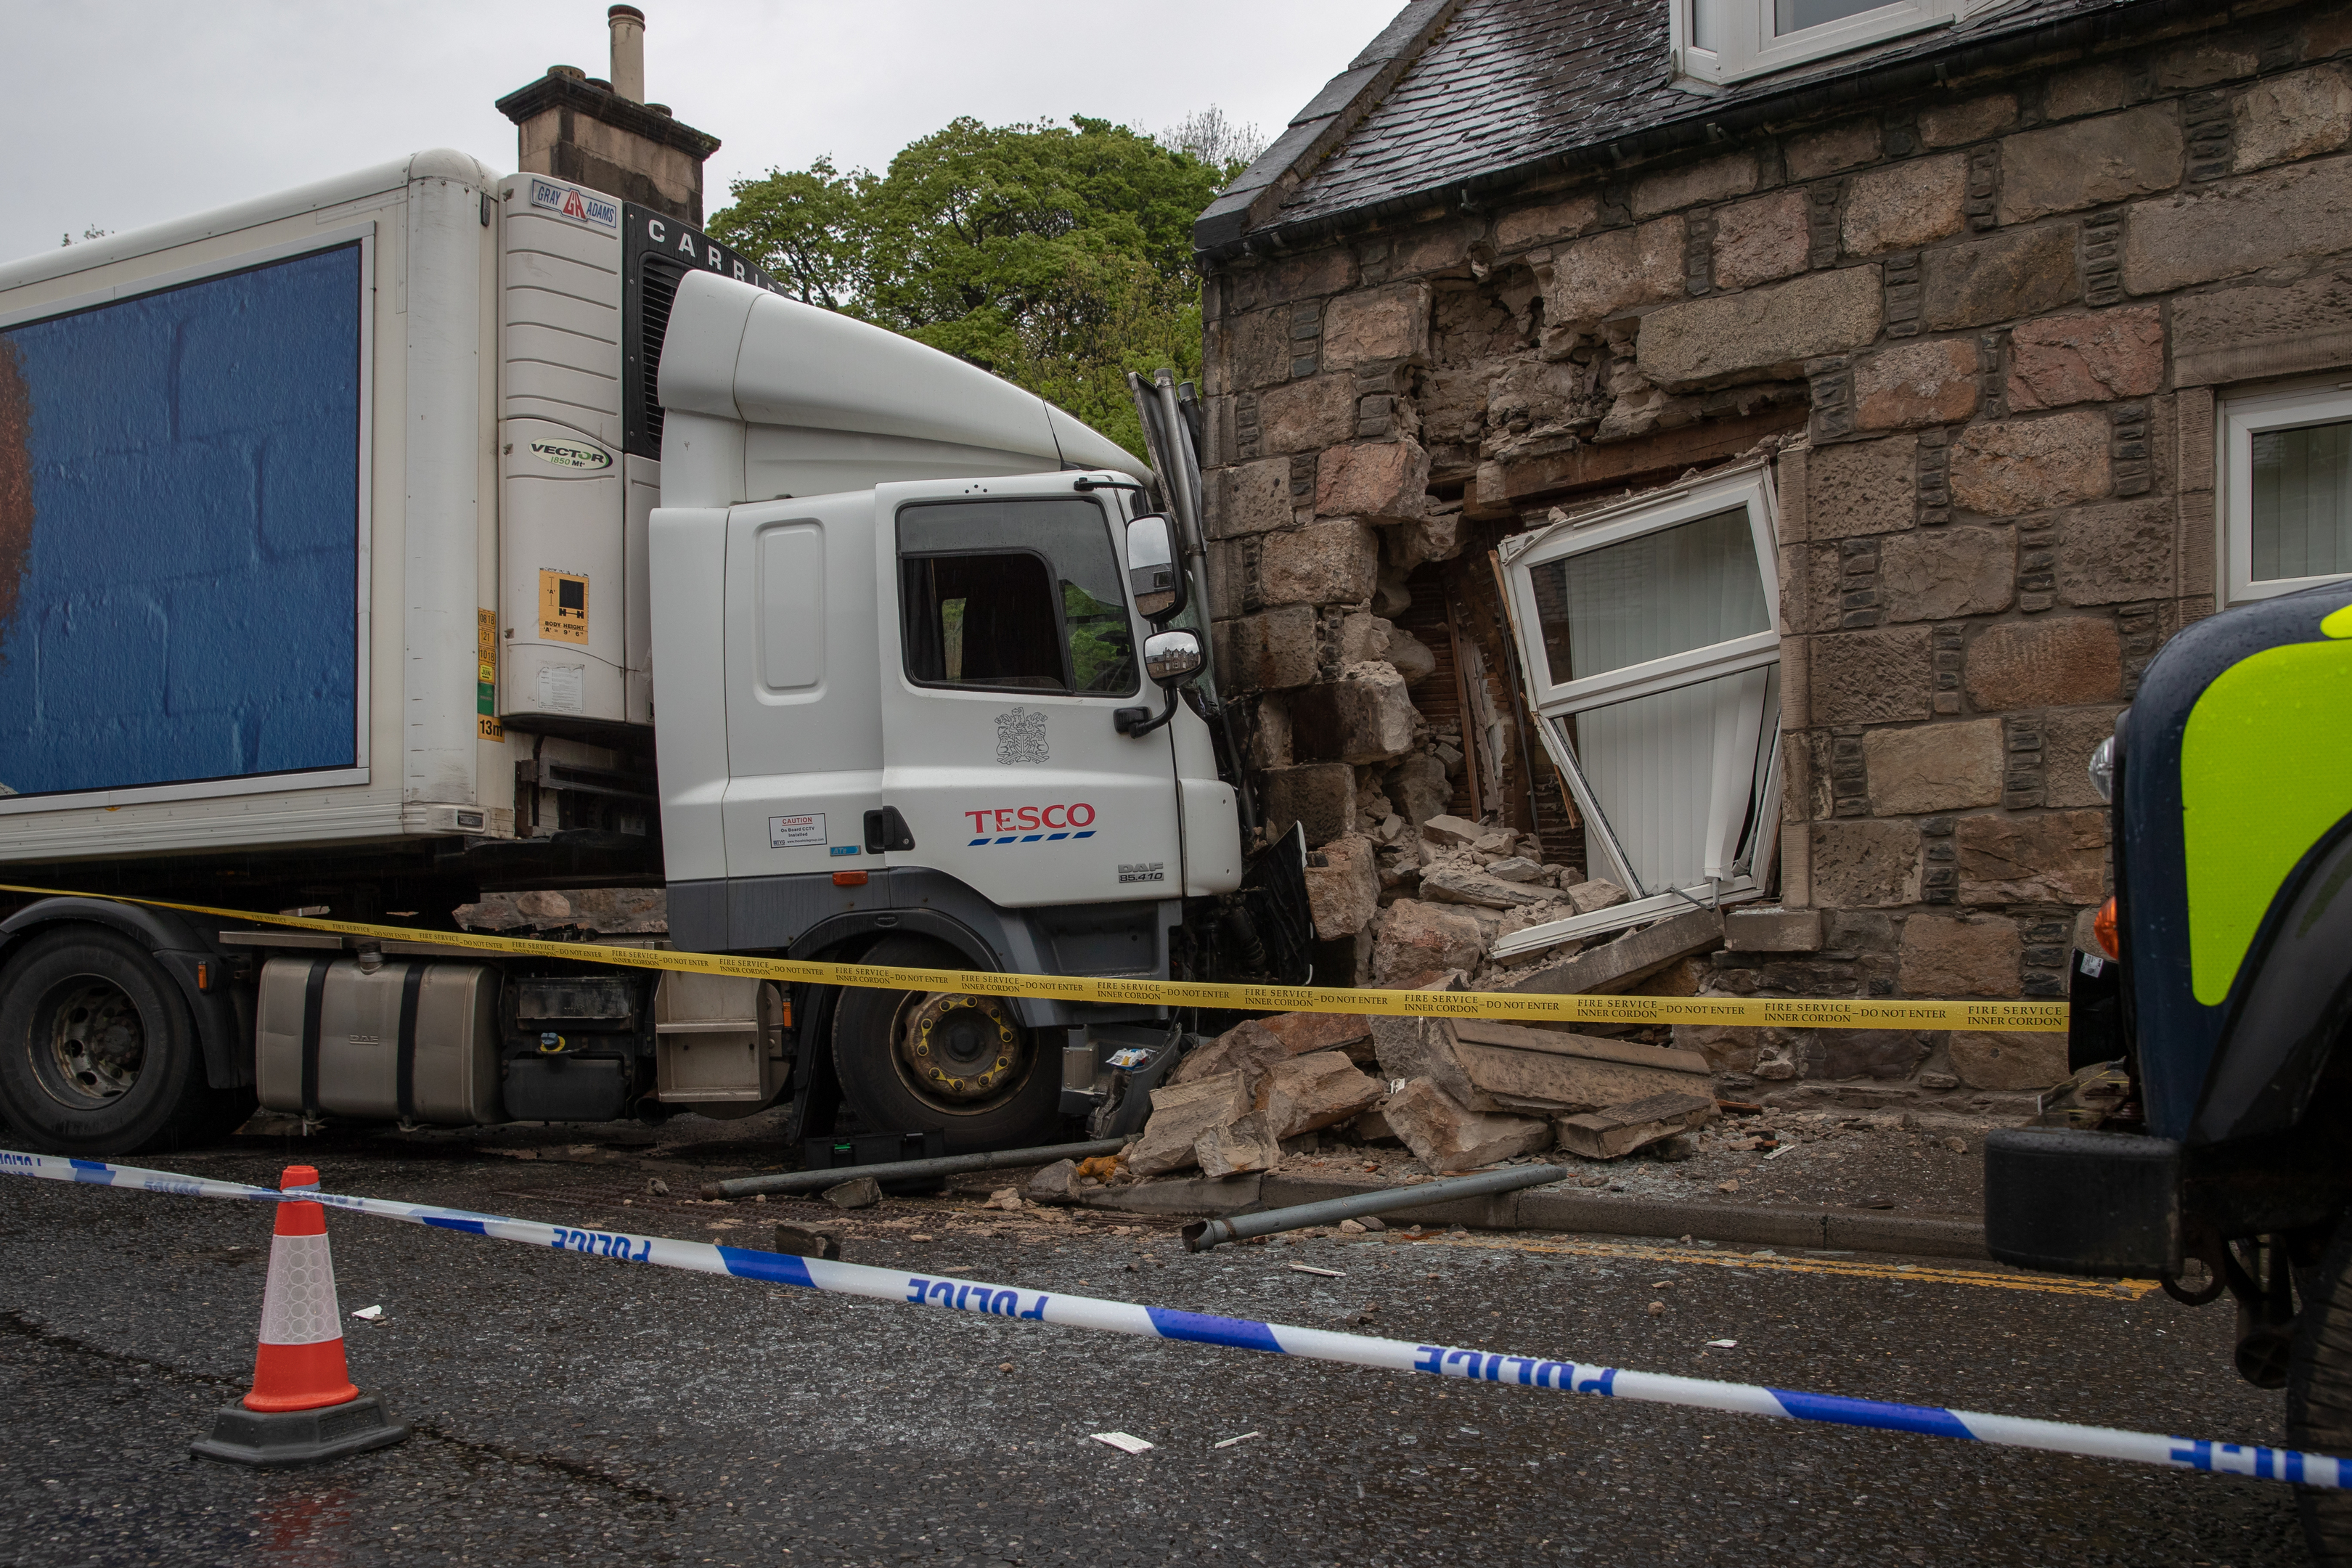 Mr Murray, 79, and his 80-year-old wife were woken by the commotion and emergency measures had to be put in place to prevent the corner of their home from collapsing